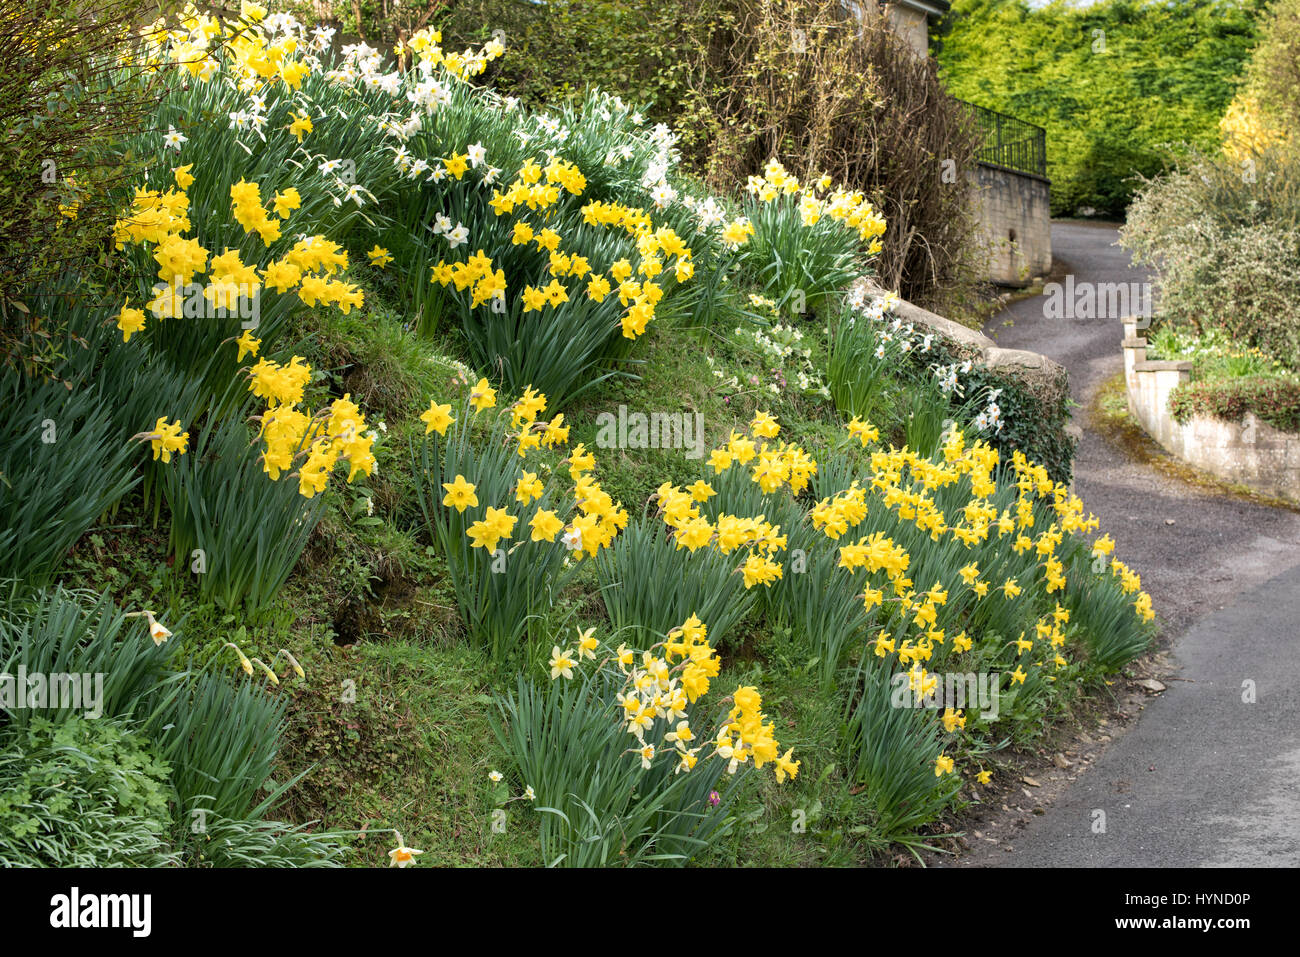 Bank of spring daffodils in the village of Wootton. West Oxfordshire, England Stock Photo